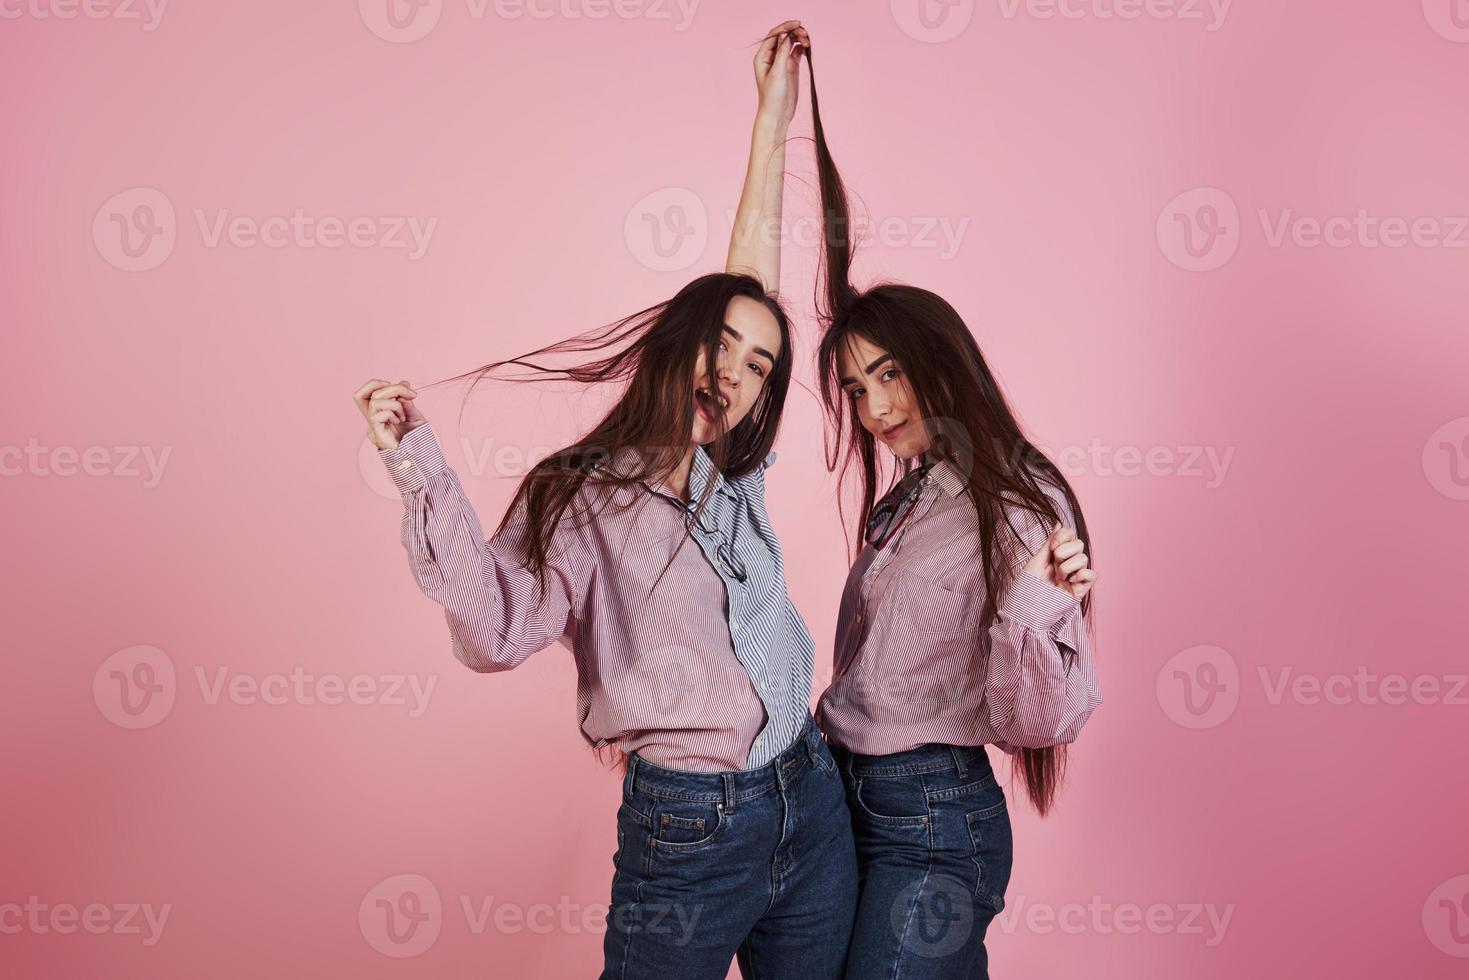 Just ramdom playful movements. Young women having fun in the studio with pink background. Adorable twins photo